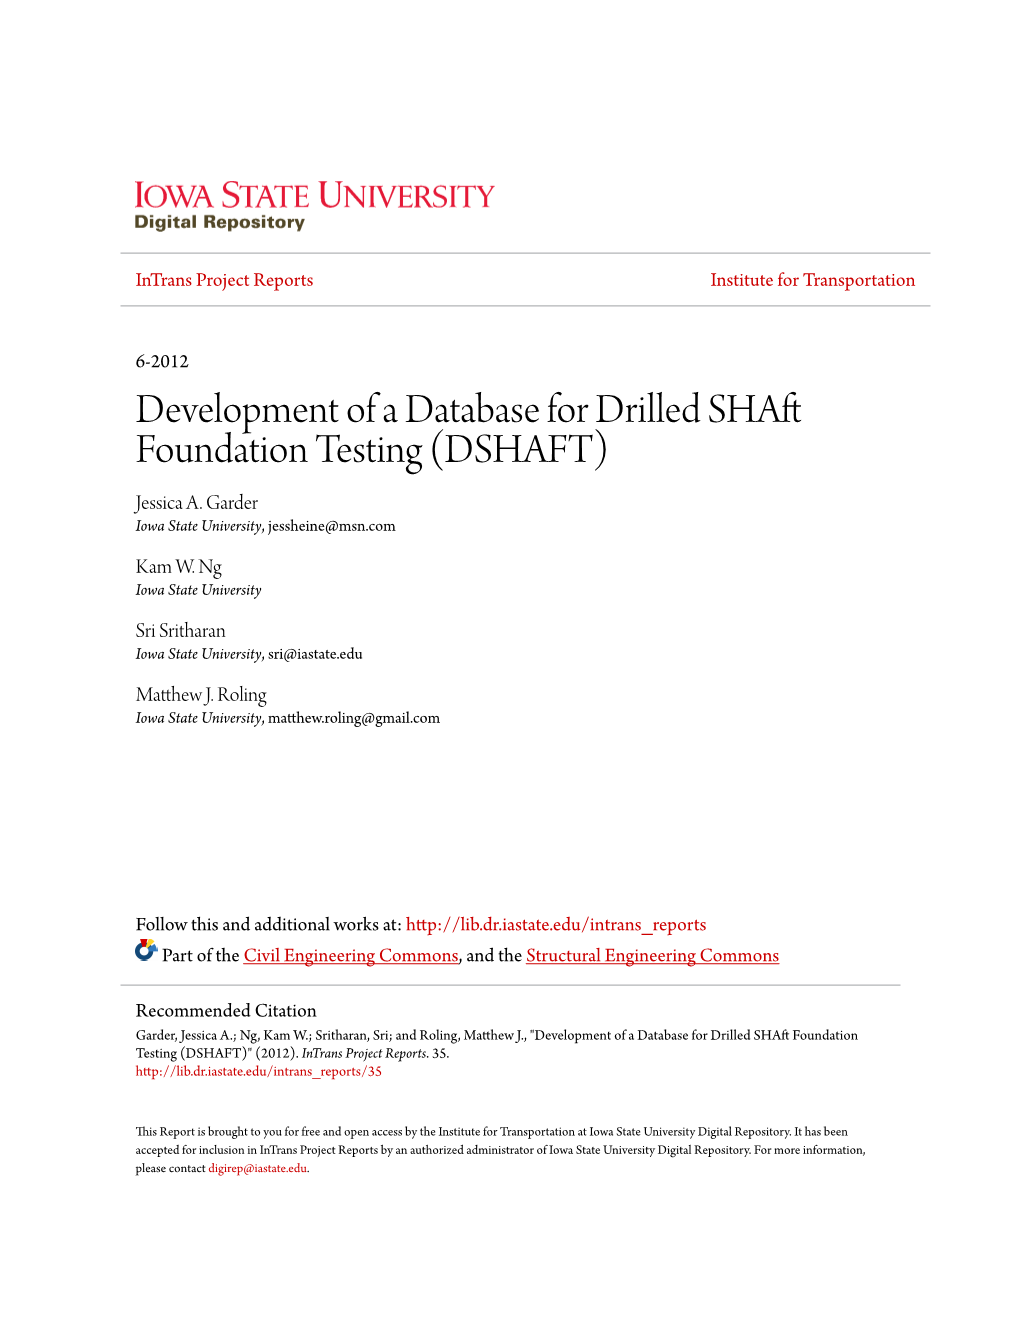 Development of a Database for Drilled Shaft Foundation Testing (DSHAFT) Jessica A